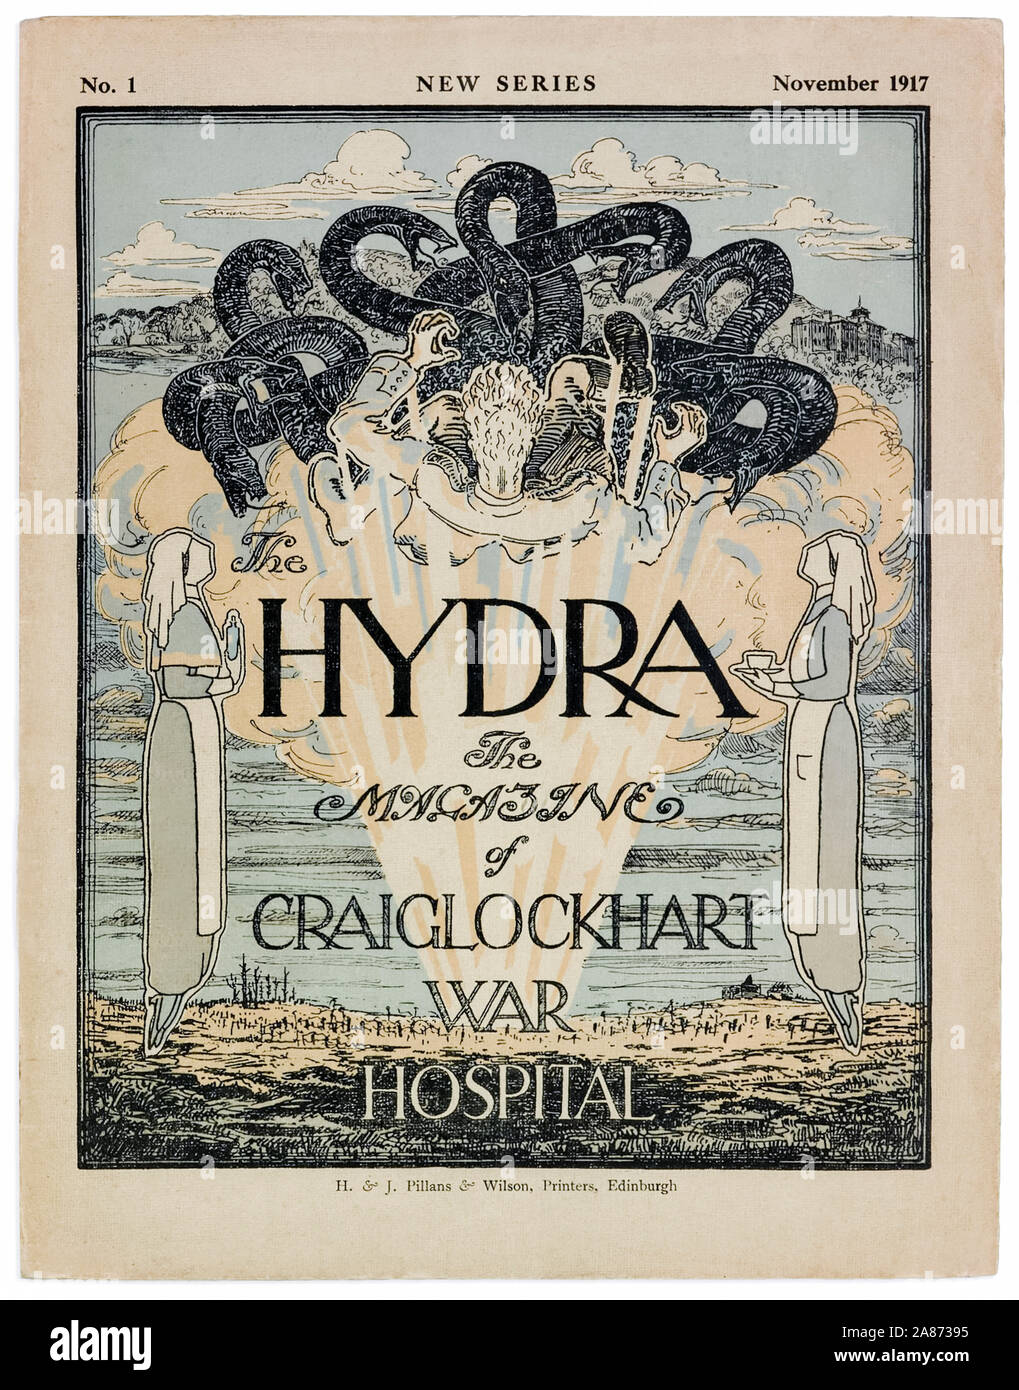 ‘The Hydra – The Magazine of Craiglockhart War Hospital’ front cover of Issue No. 1 Series 2 November 1917 featuring an illustration of a many headed serpent attacking a man flanked by 2 nurses over a battlefield. The magazine was produced by patients of ‘The Hydropathic’ hospital which was a military psychiatric hospital for the treatment of officers suffering from shell-shock between 1916-1919. Famous patients and contributors to the magazine included the war poets Siegfried Sassoon (1886-1967) and Wilfred Owen (1893-1918). Stock Photo